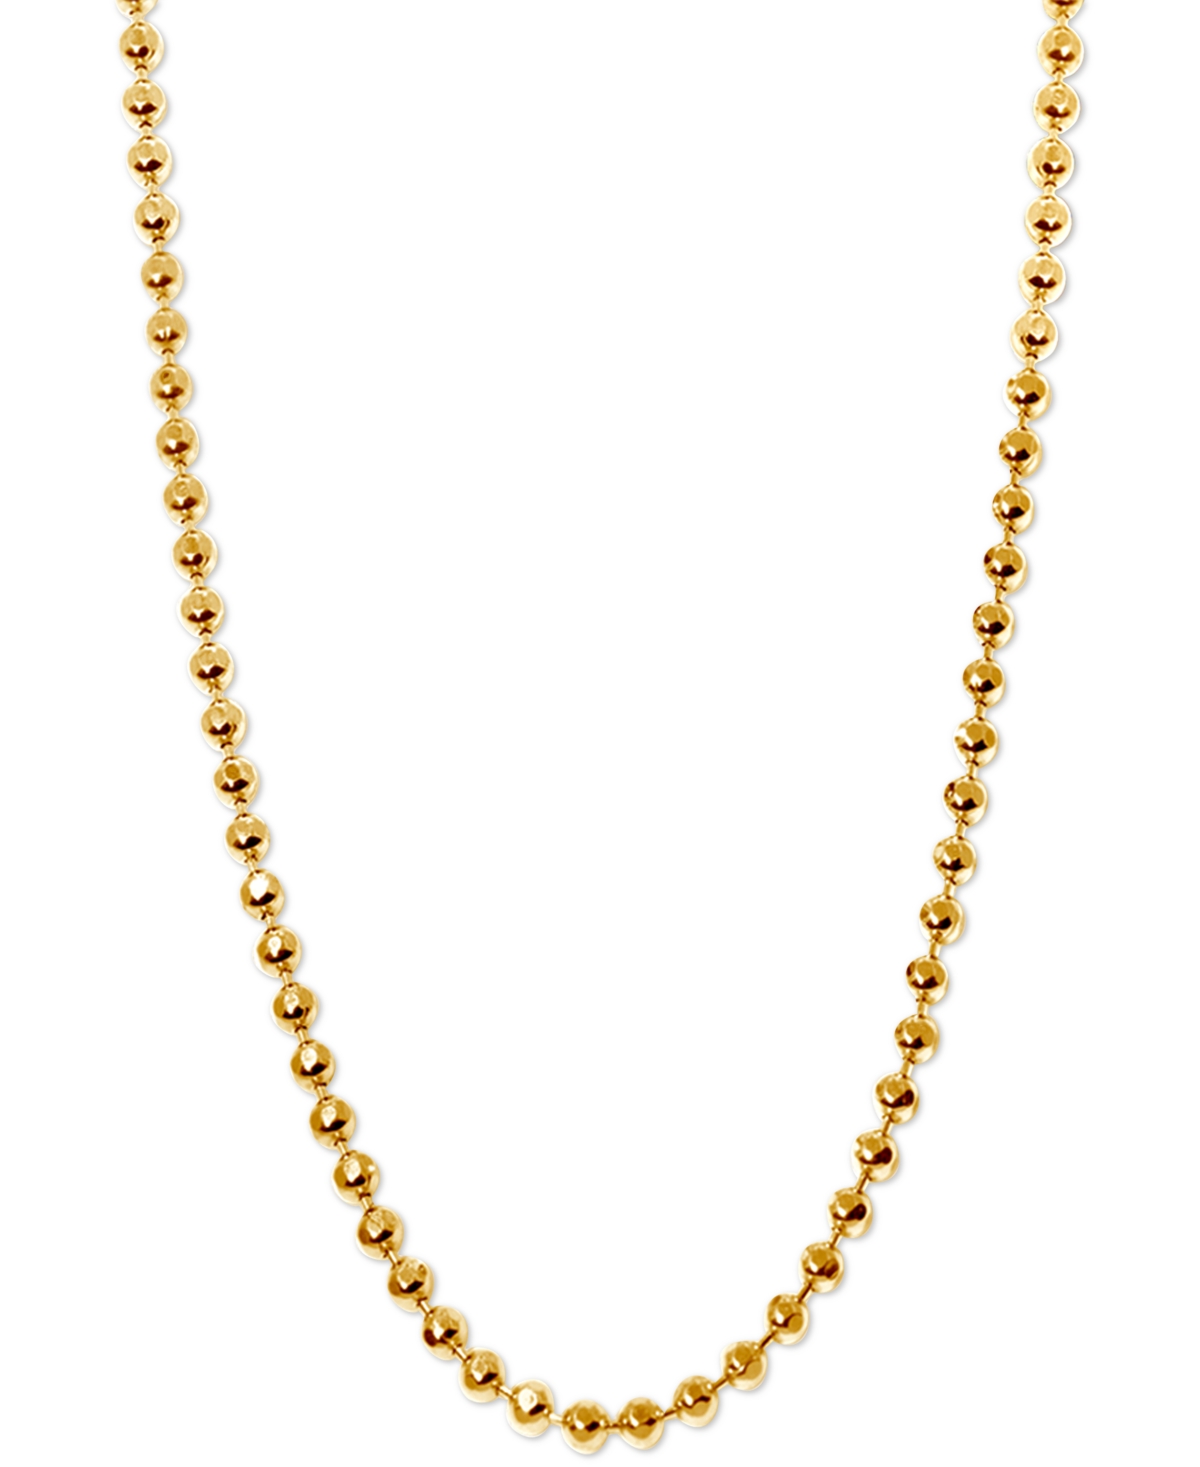 20" Ball Chain Necklace in 14k Gold - Yellow Gold